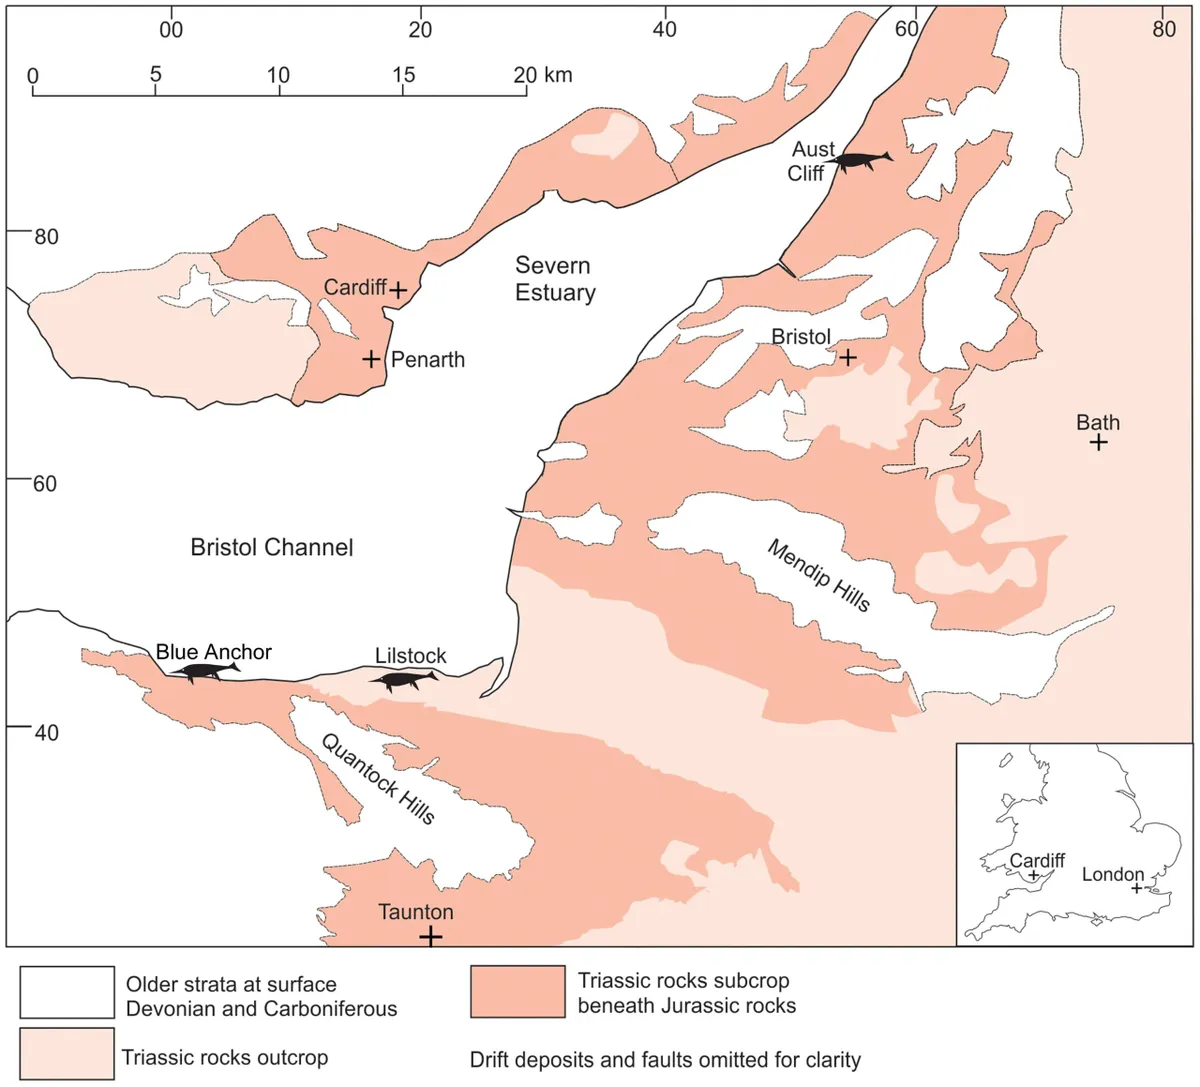 Distribution of the Triassic rocks in the Bristol Channel–Severn Estuary area and the three key ichthyosaur localities